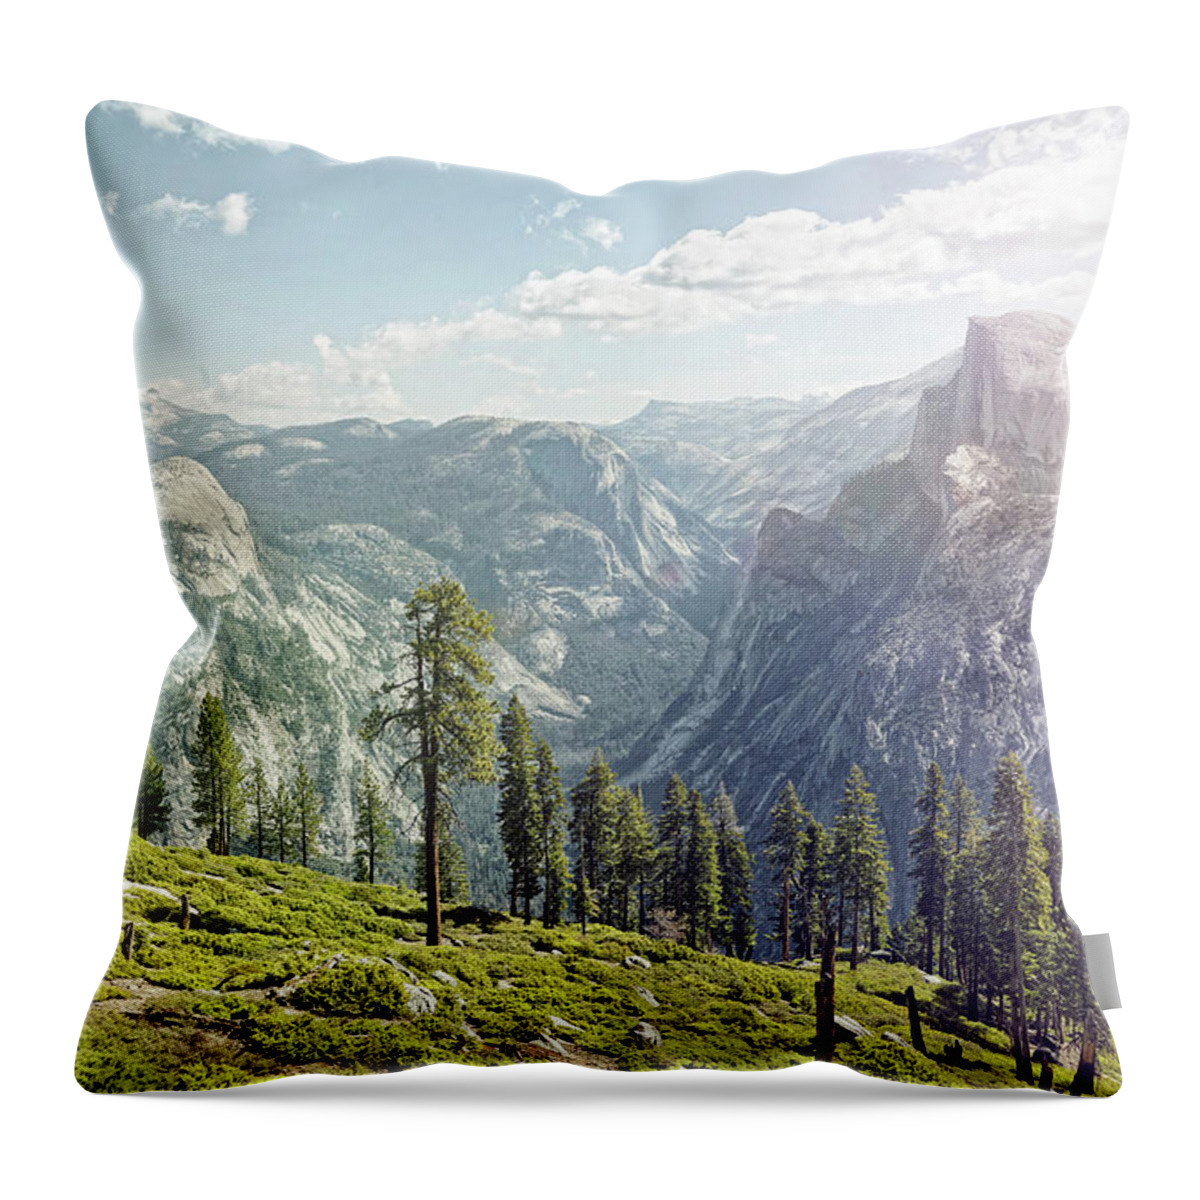 Scenics Throw Pillow featuring the photograph Half Dome In Yosemite With Foreground by James O'neil